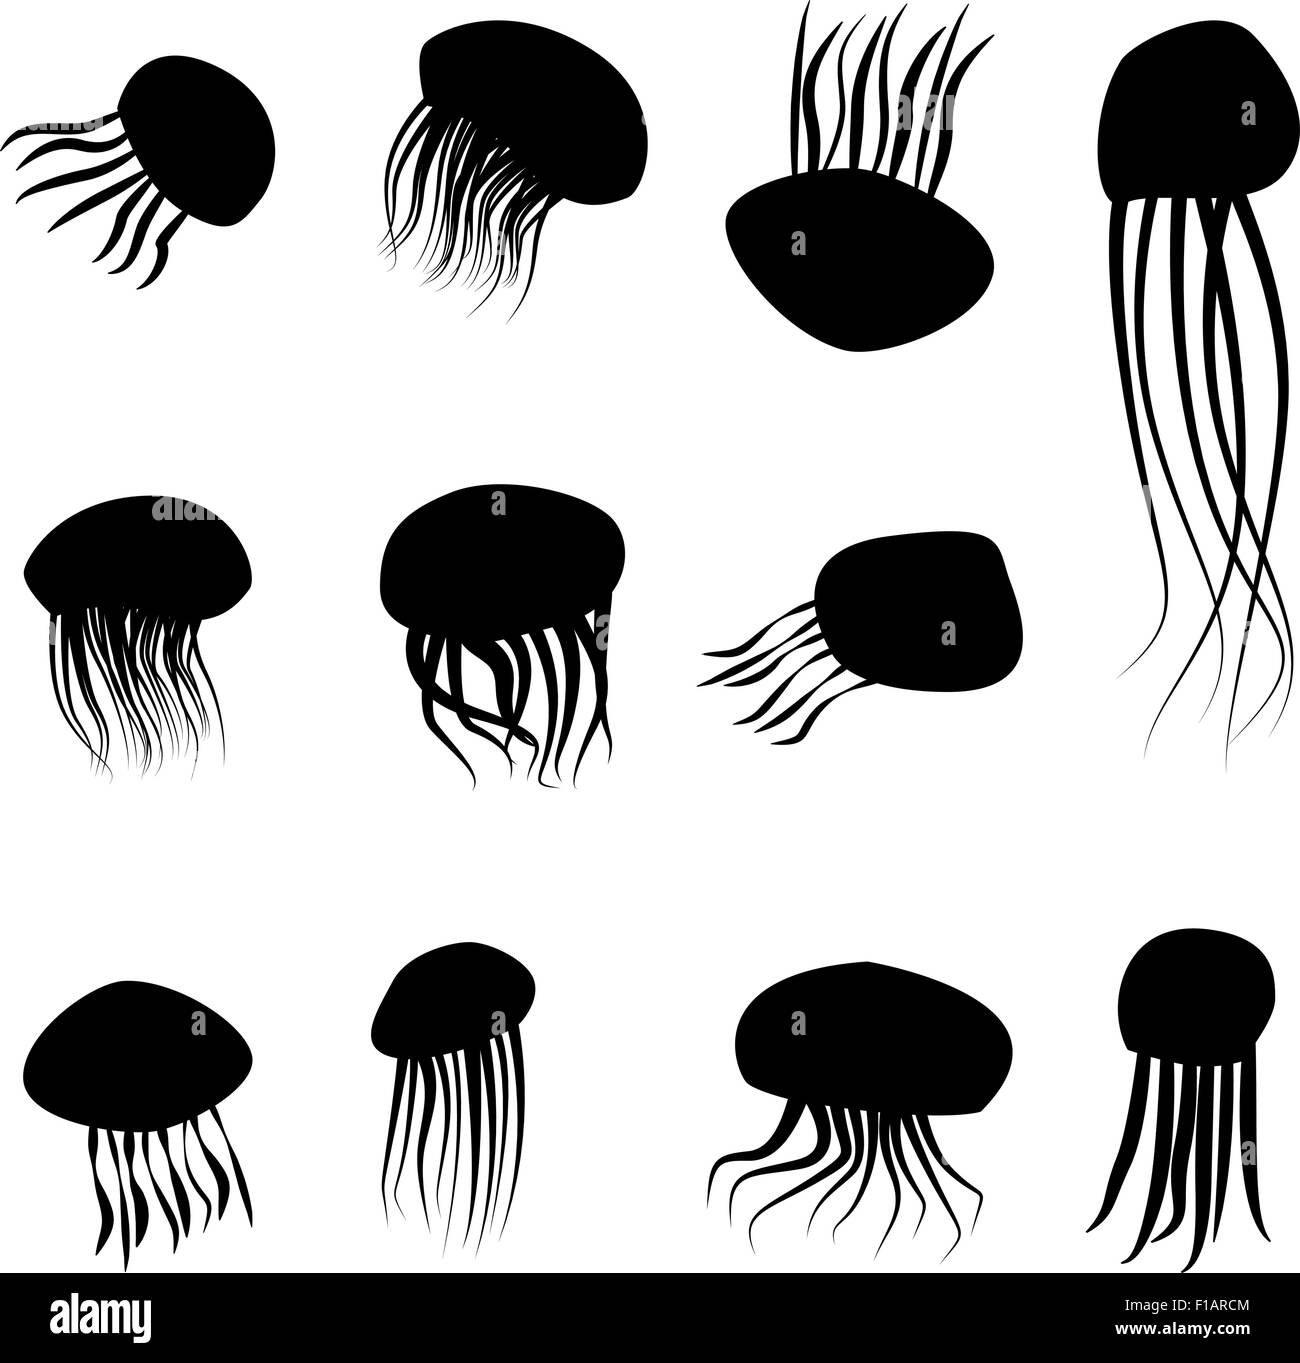 Set of jellyfish silhouettes in simple style, vector illustration Stock Vector